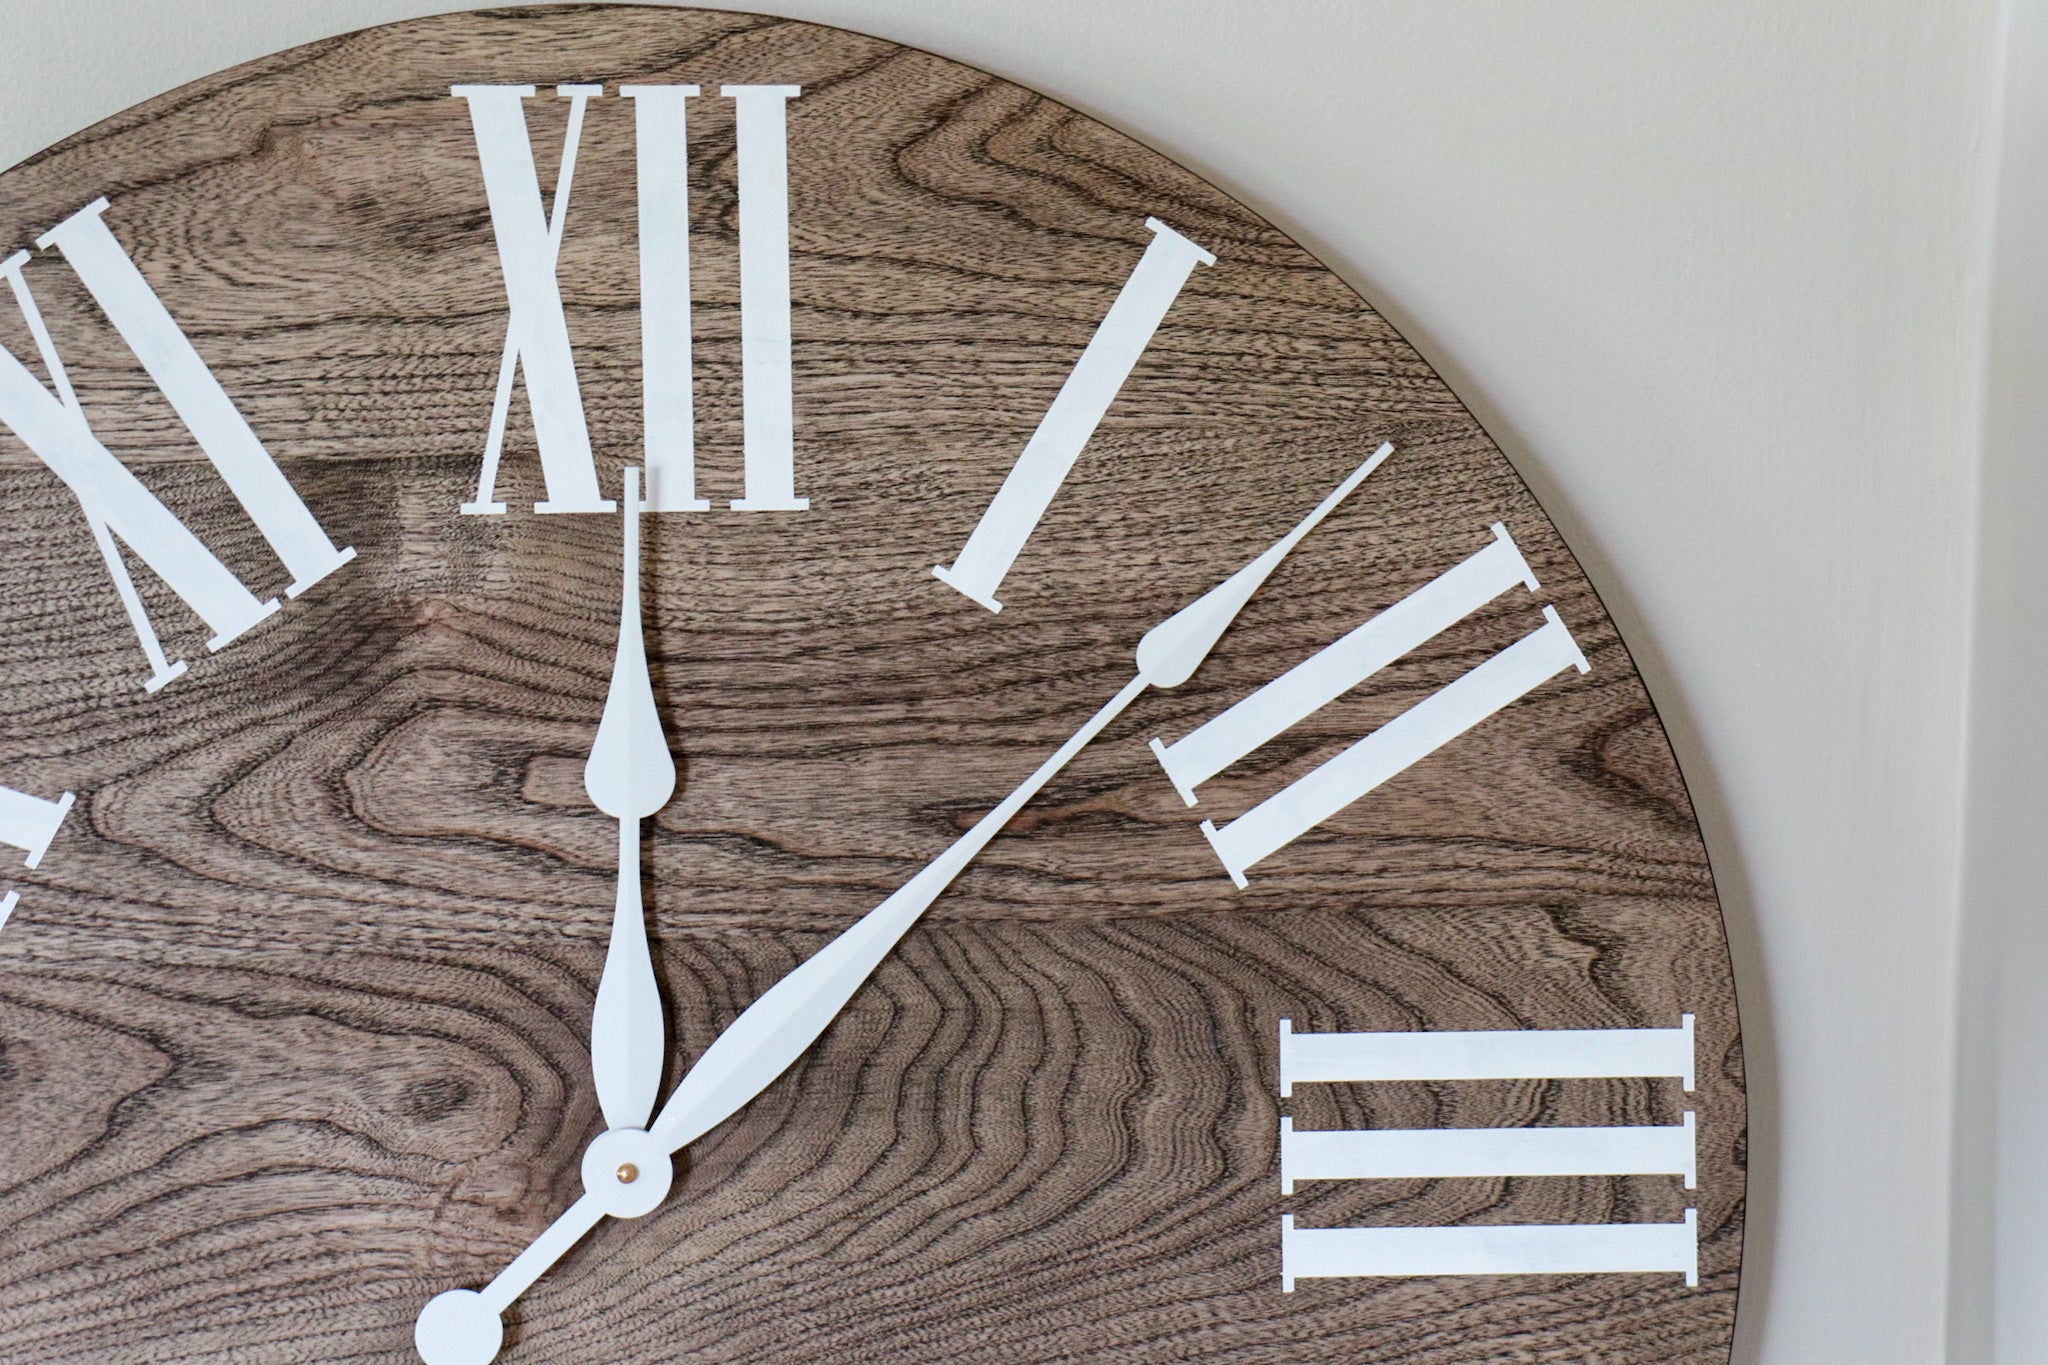 Large Grey 26" Solid Wood Hackberry Wall Clock (in stock)